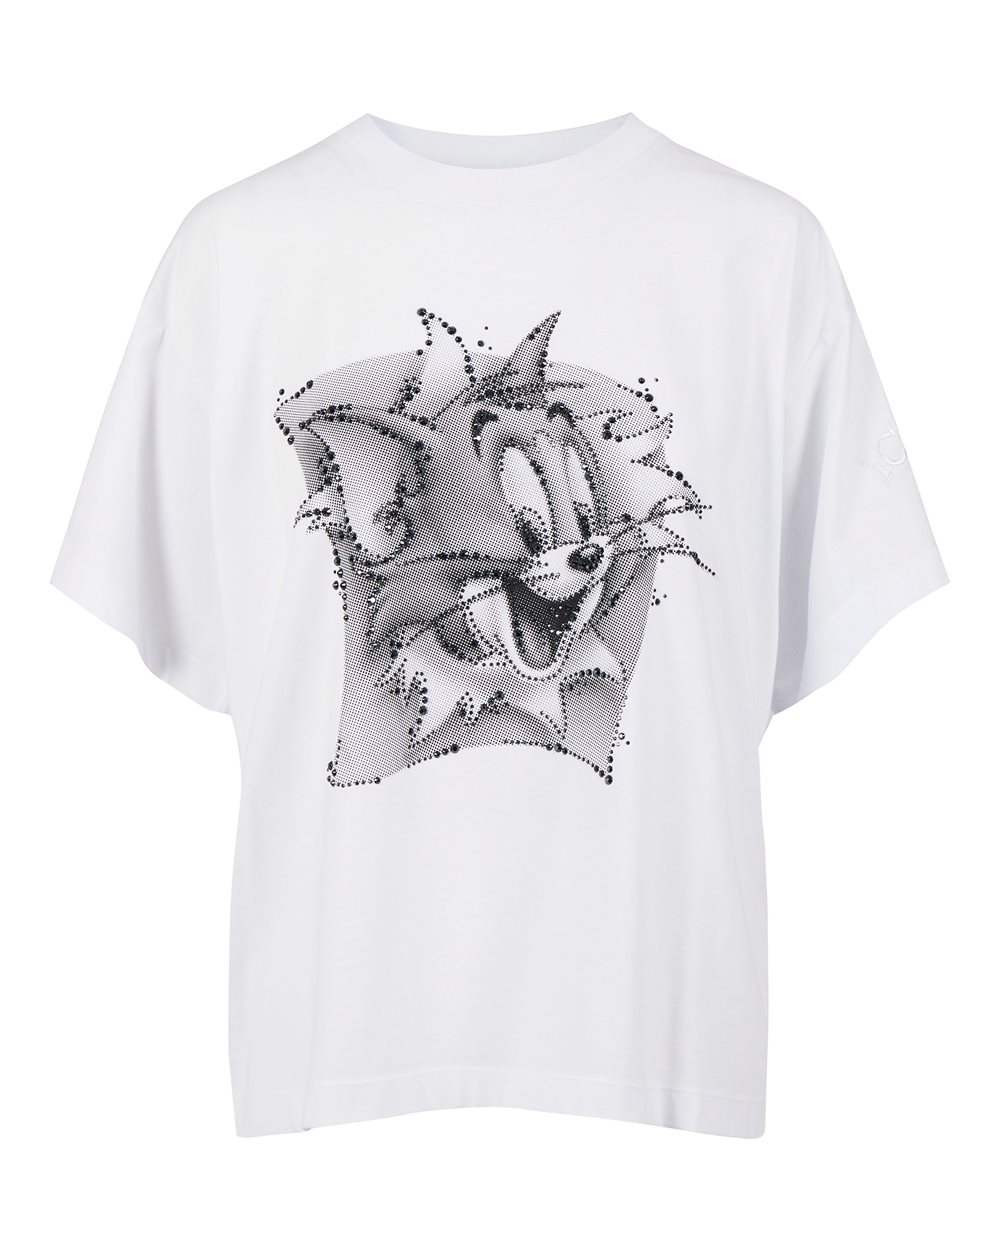 T-shirt with cartoon detail - carosello gift guide donna | Iceberg - Official Website